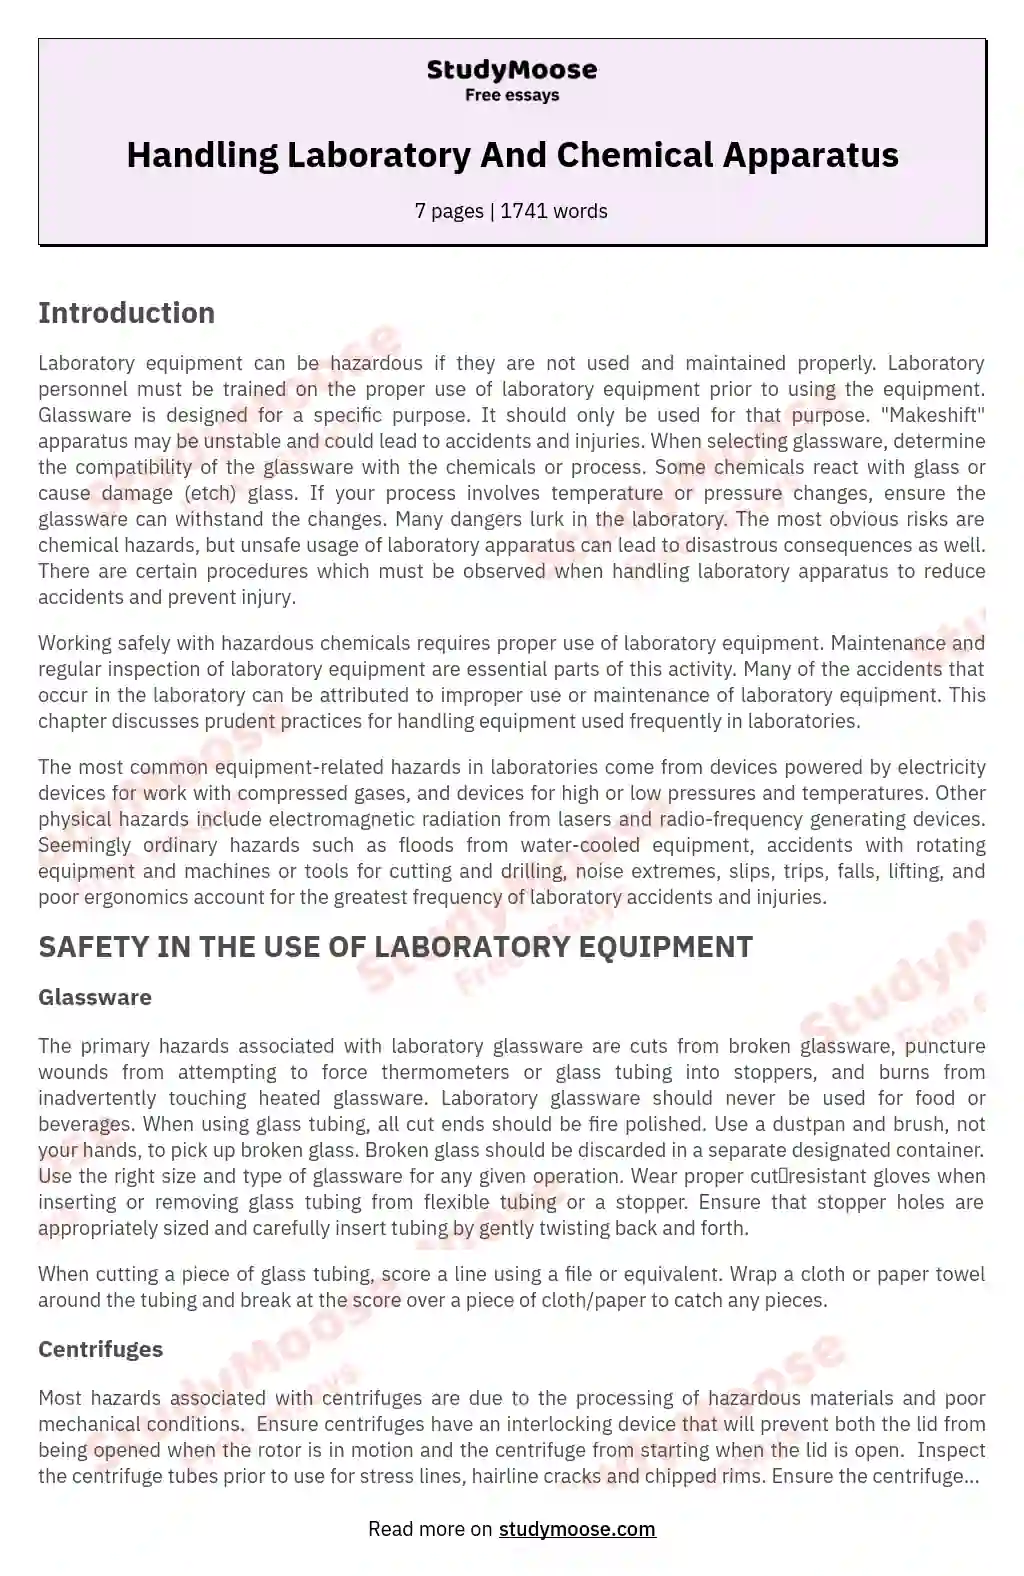 Handling Laboratory And Chemical Apparatus essay